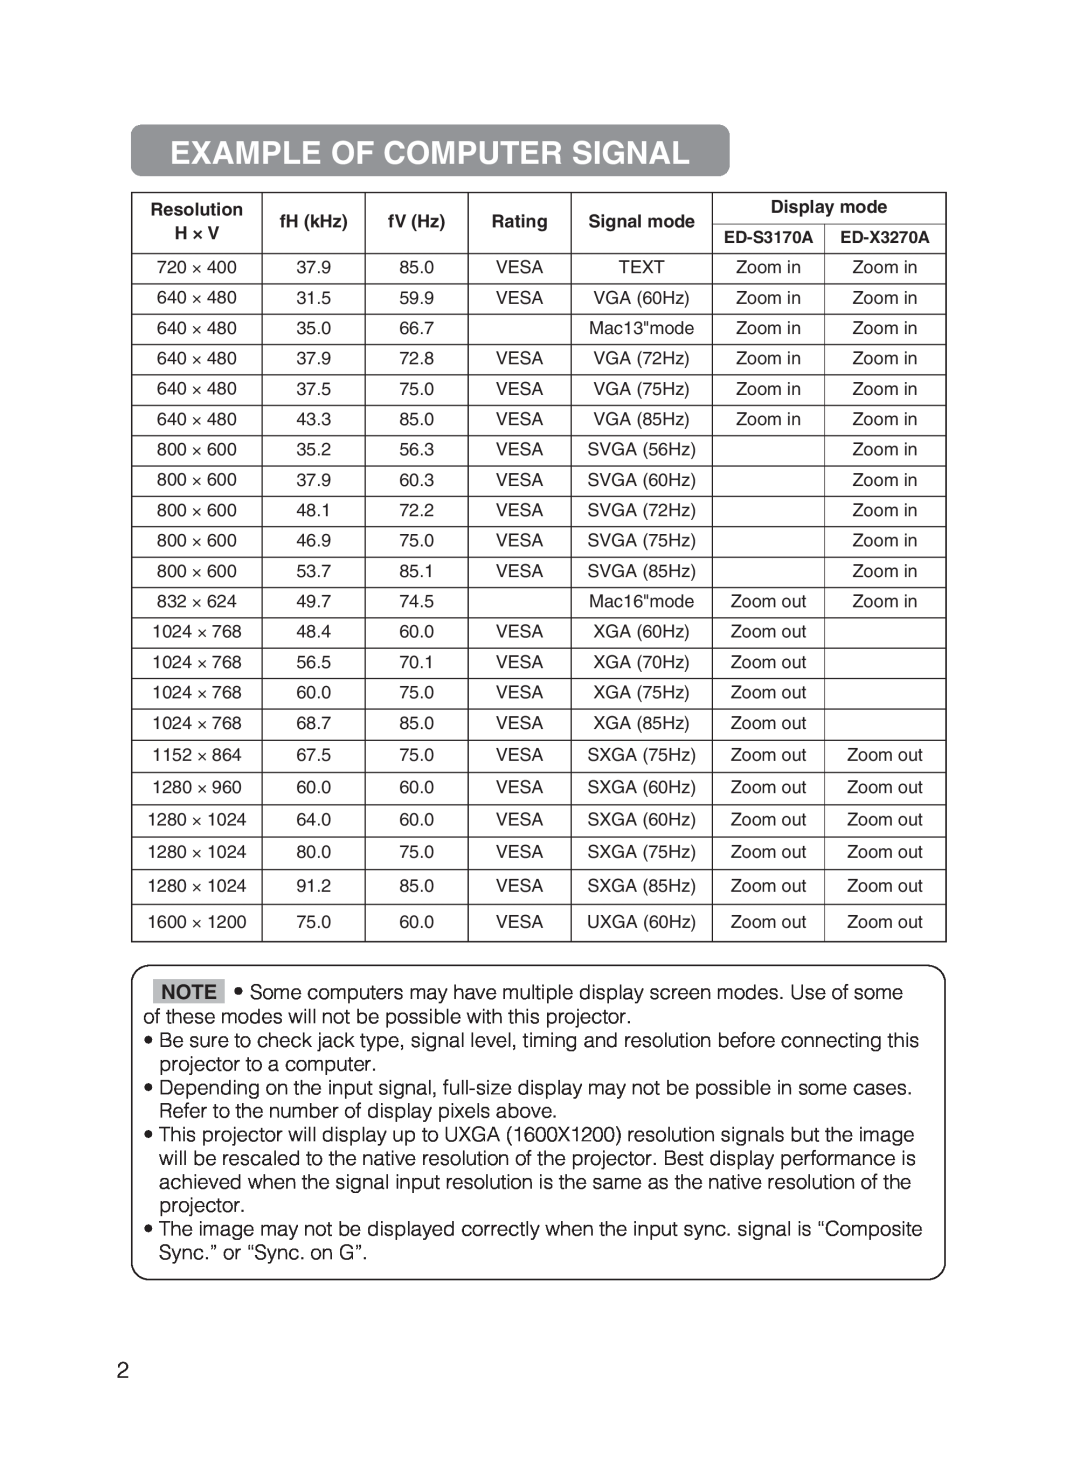 Dukane 8755B user manual Example Of Computer Signal, Resolution, fH kHz, fV Hz, Rating, Signal mode, Display mode 